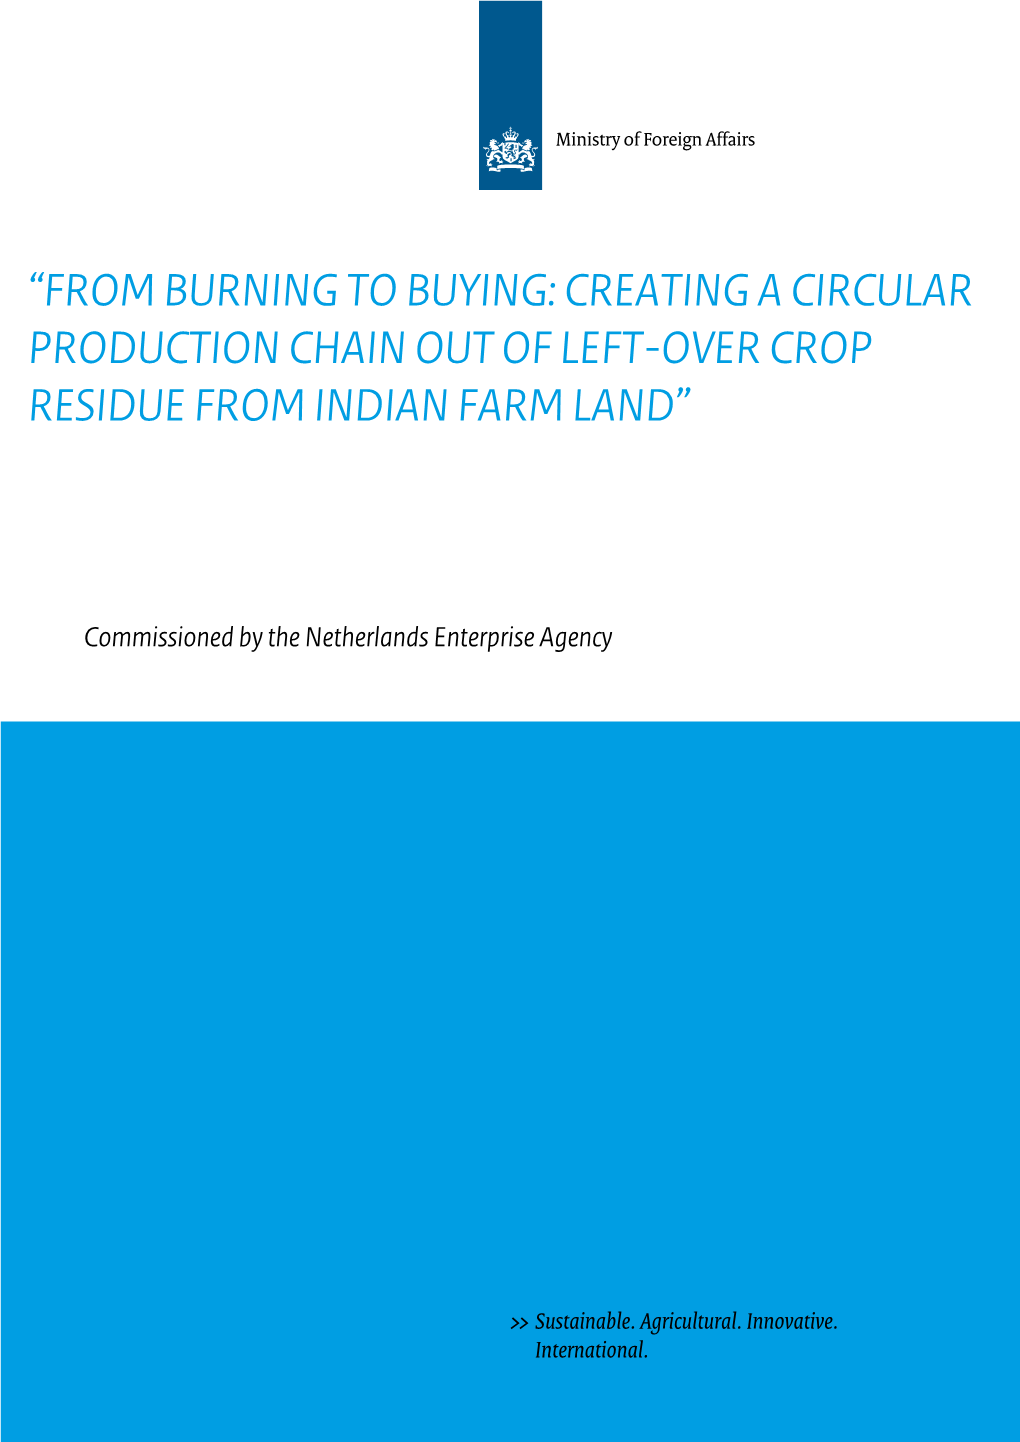 From Burning to Buying: Creating a Circular Production Chain out of Left-Over Crop Residue from Indian Farm Land”